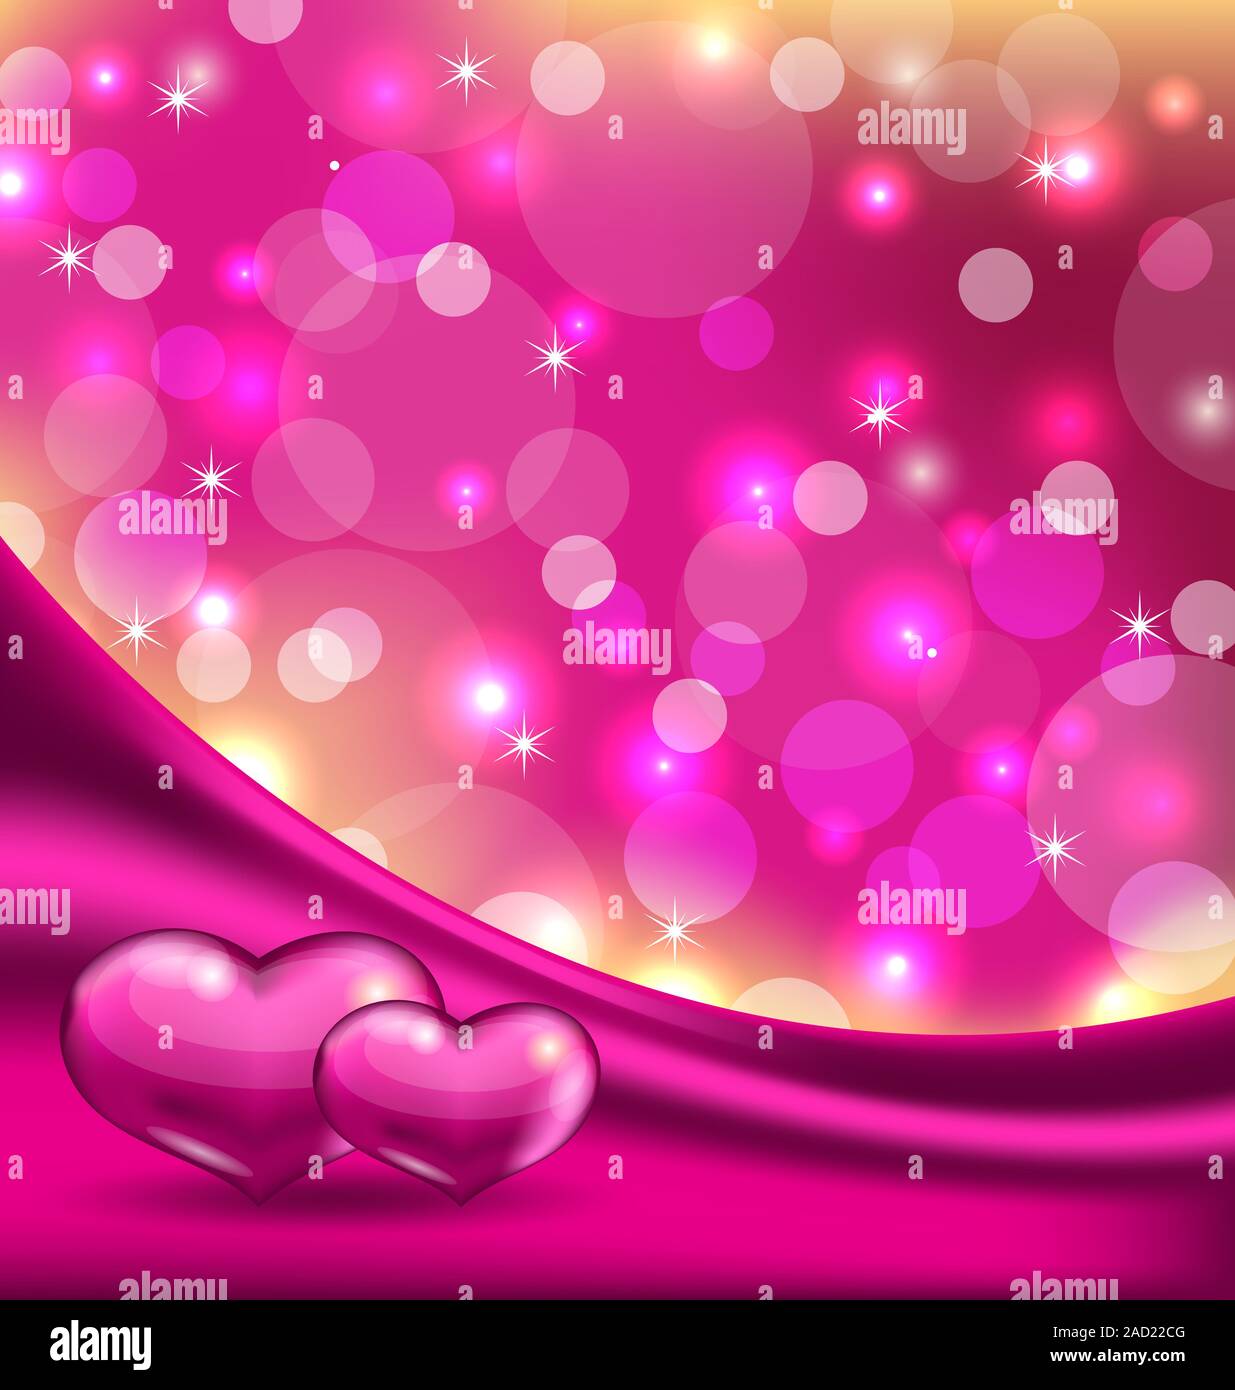 Valentine's background with beautiful hearts Stock Photo